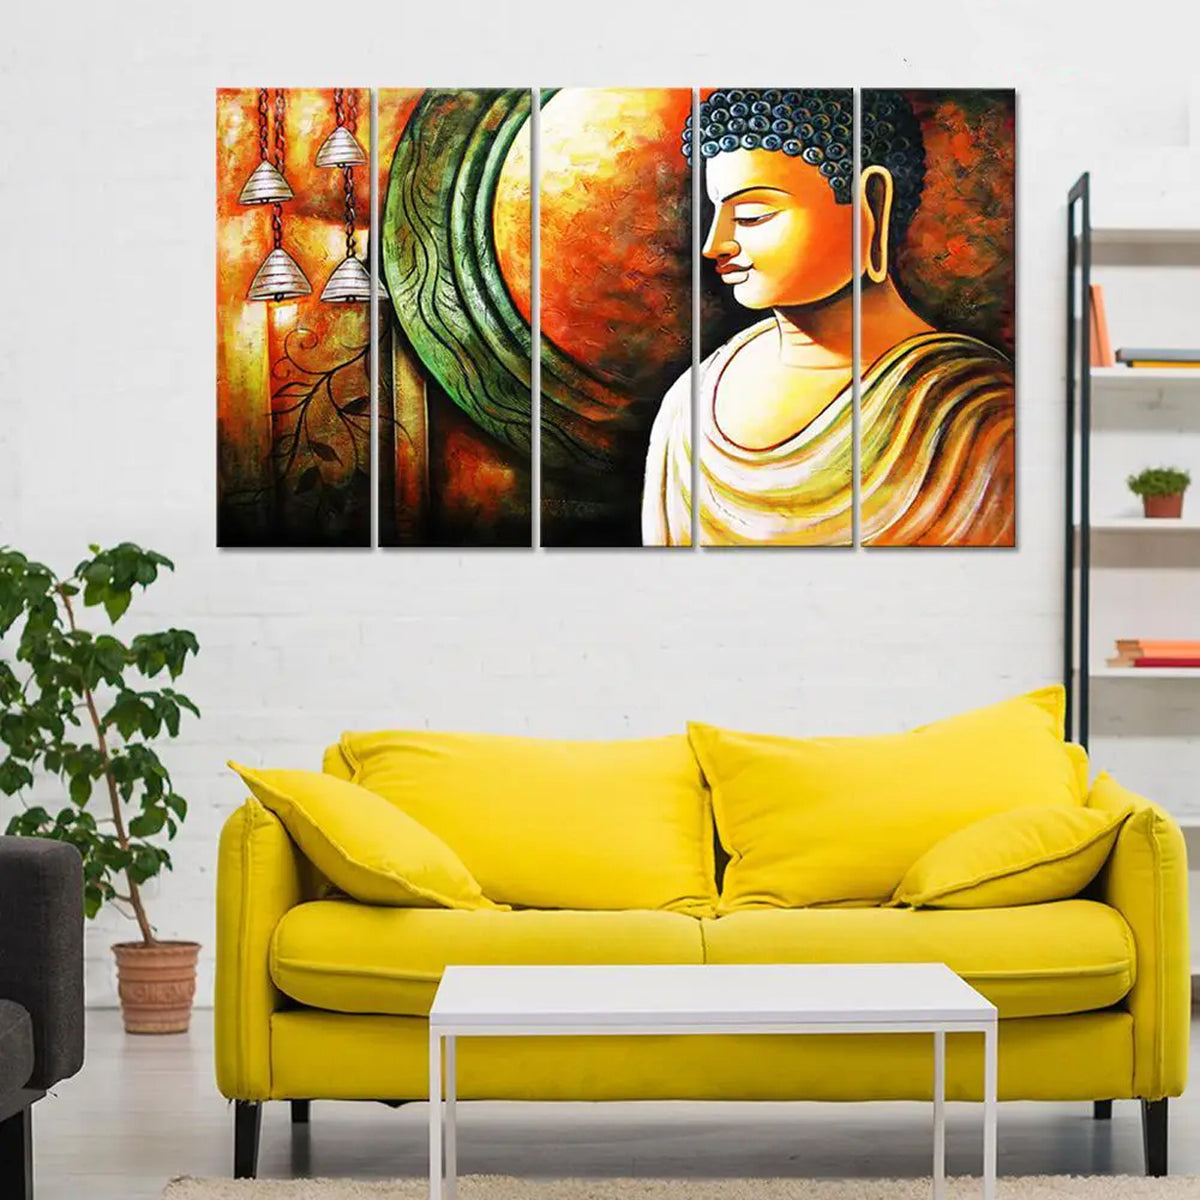 Peaceful Presence of Budhha in Four Panel Wall Art | wall painting | wall hanging